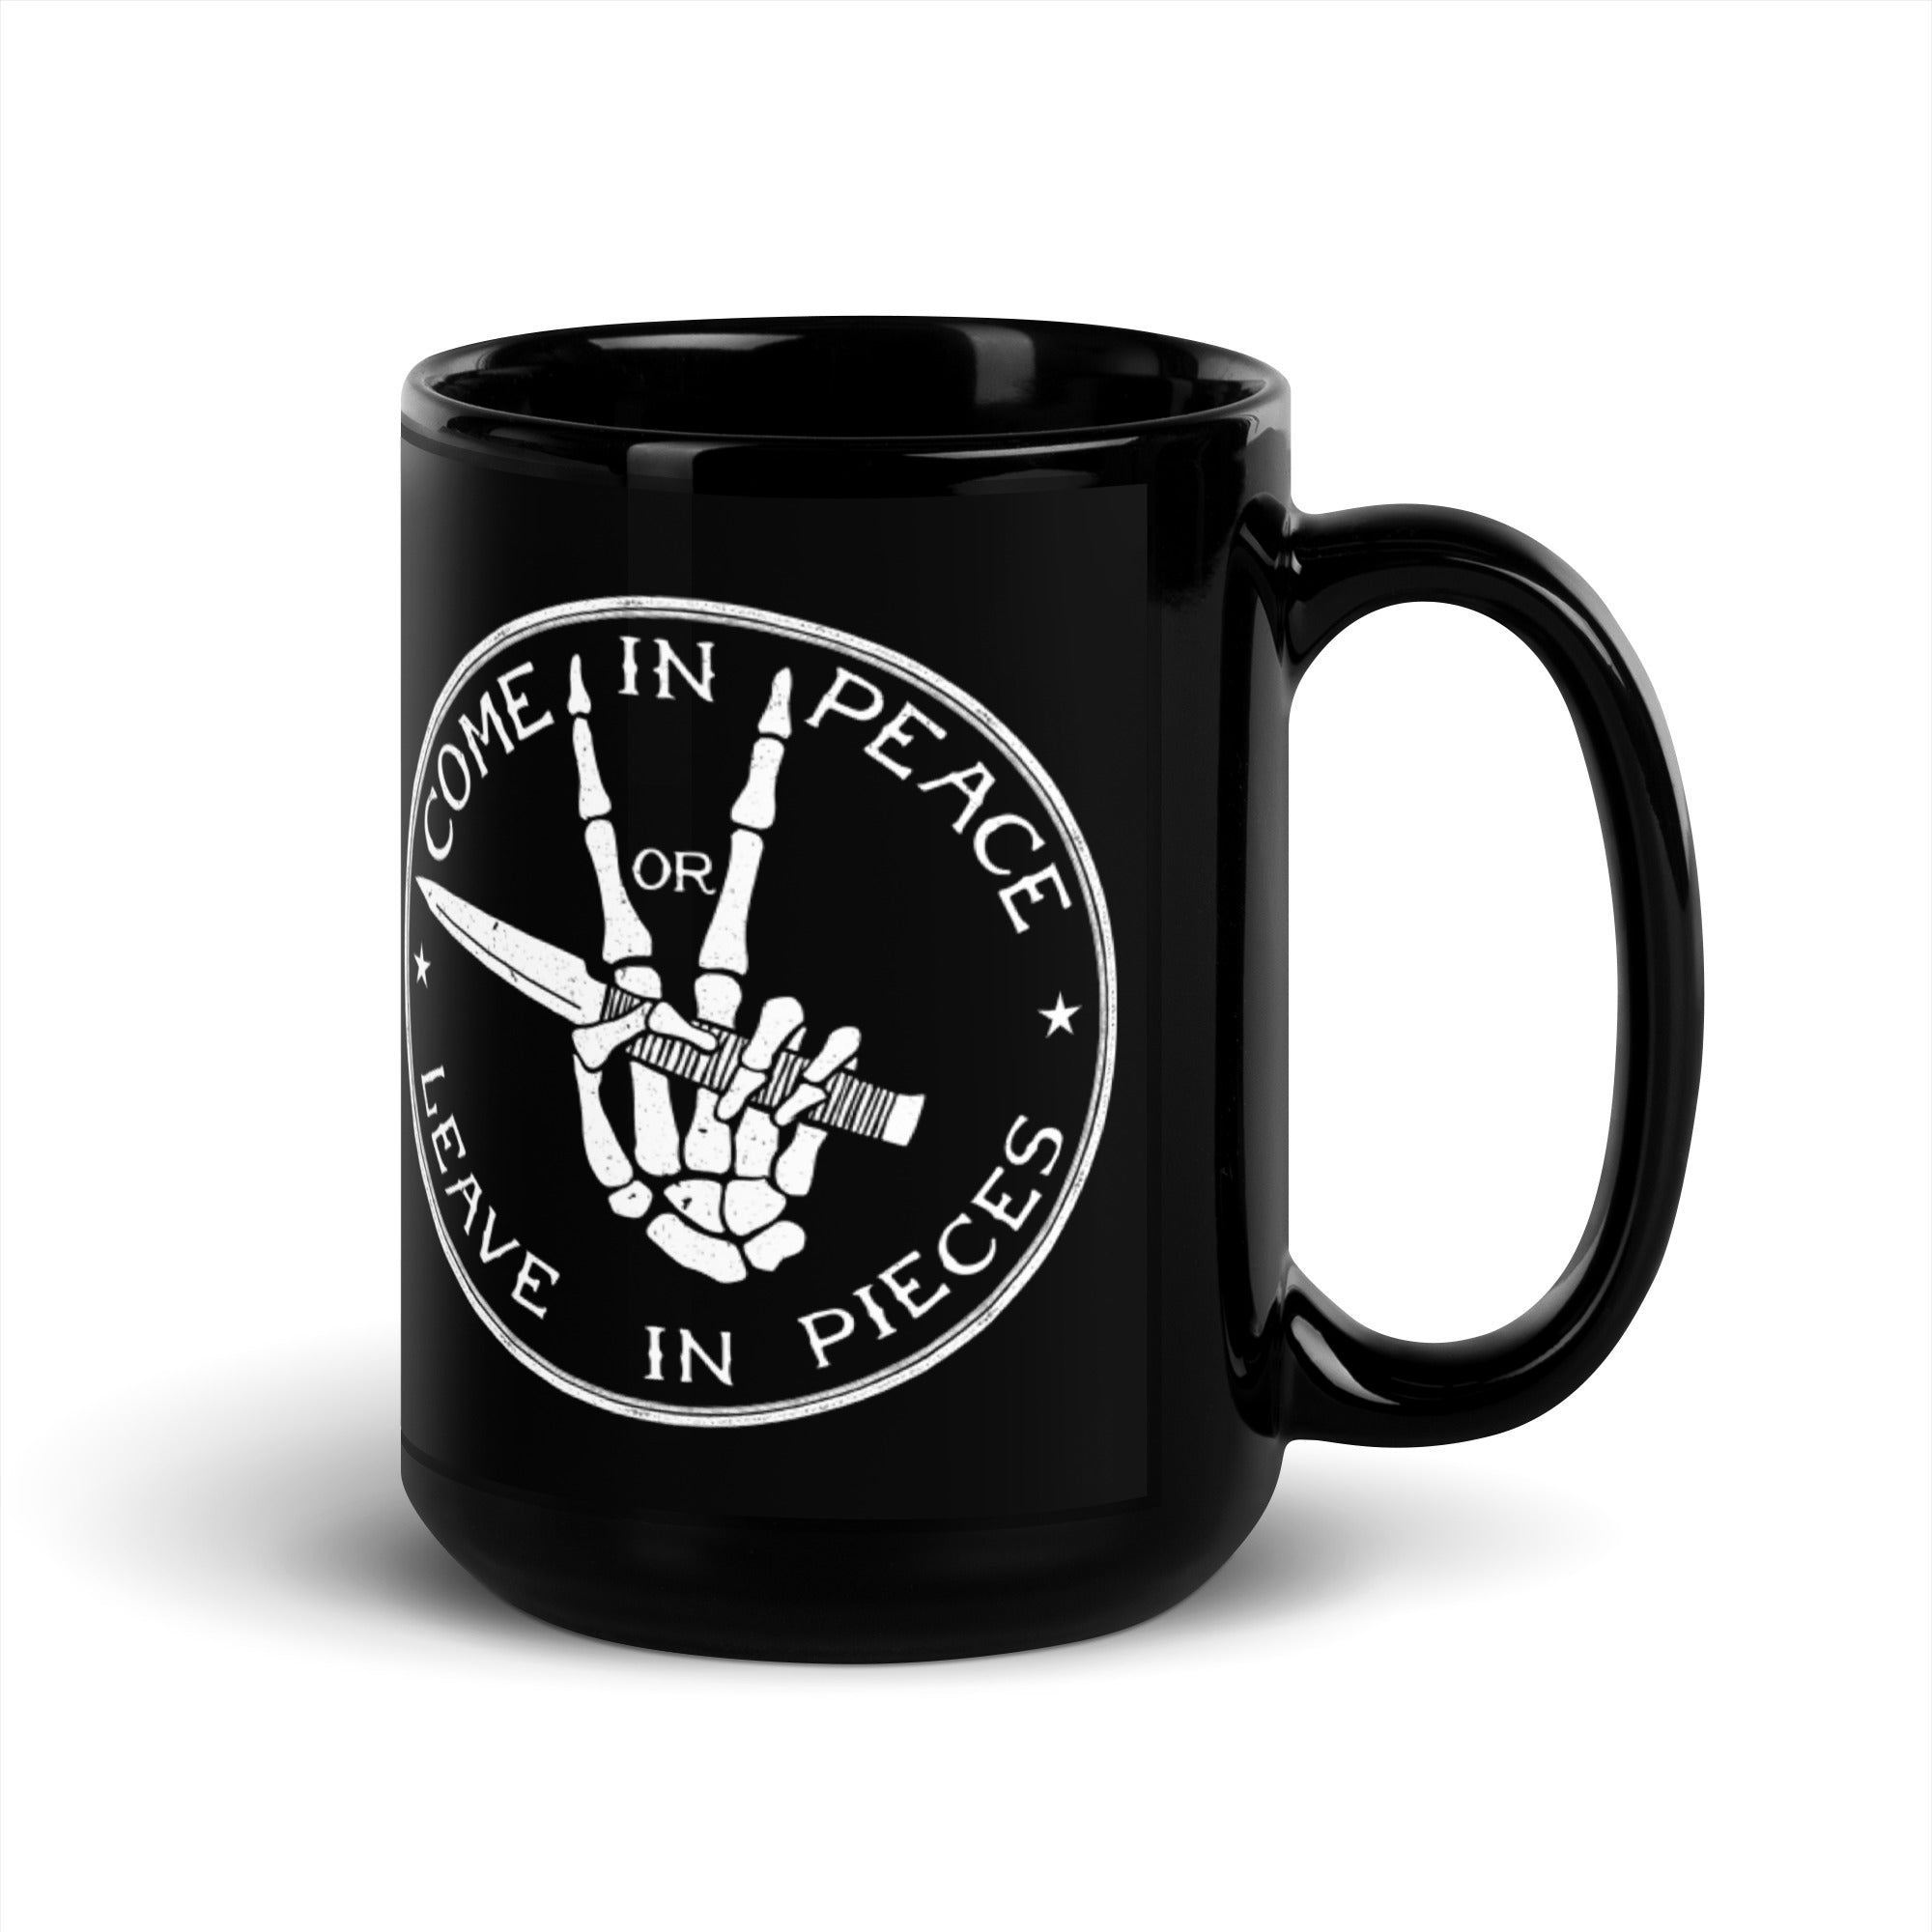 Come in Peace Or Leave in Pieces Mug